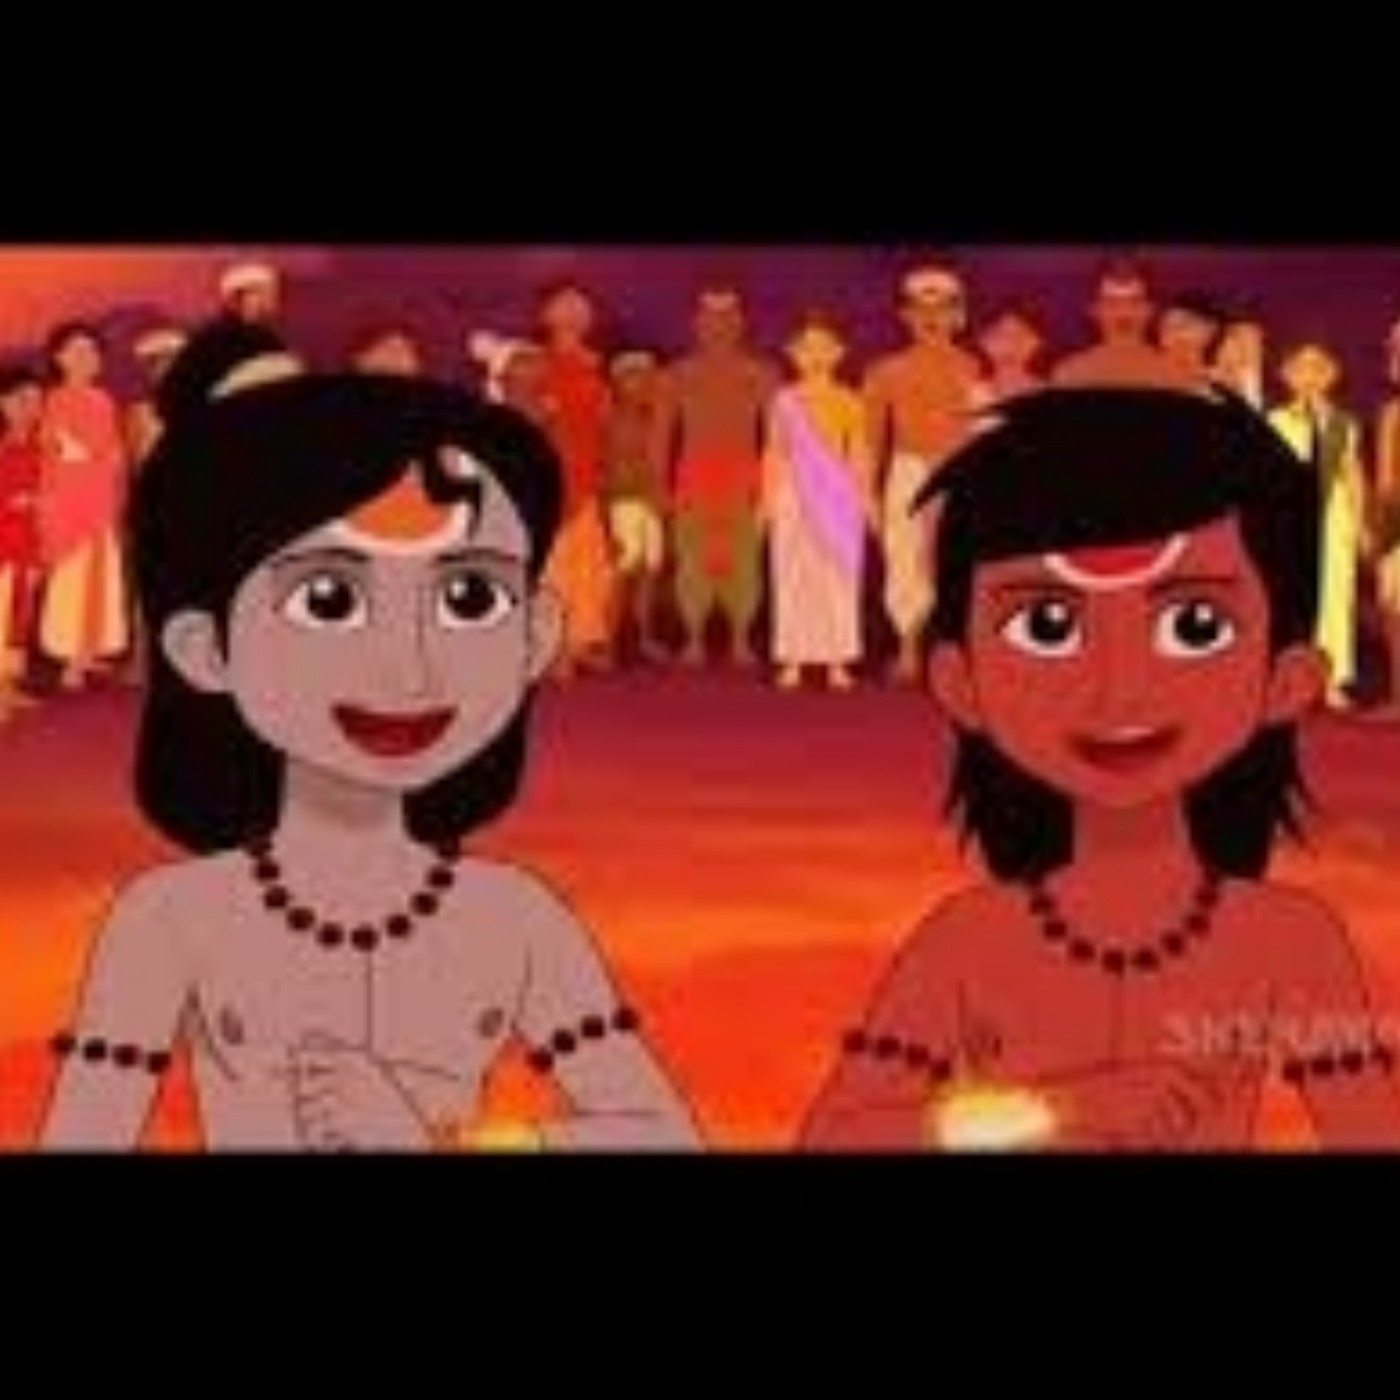 Tamil Dubbed Animation Movies Hd 720p | Podcast on SoundOn